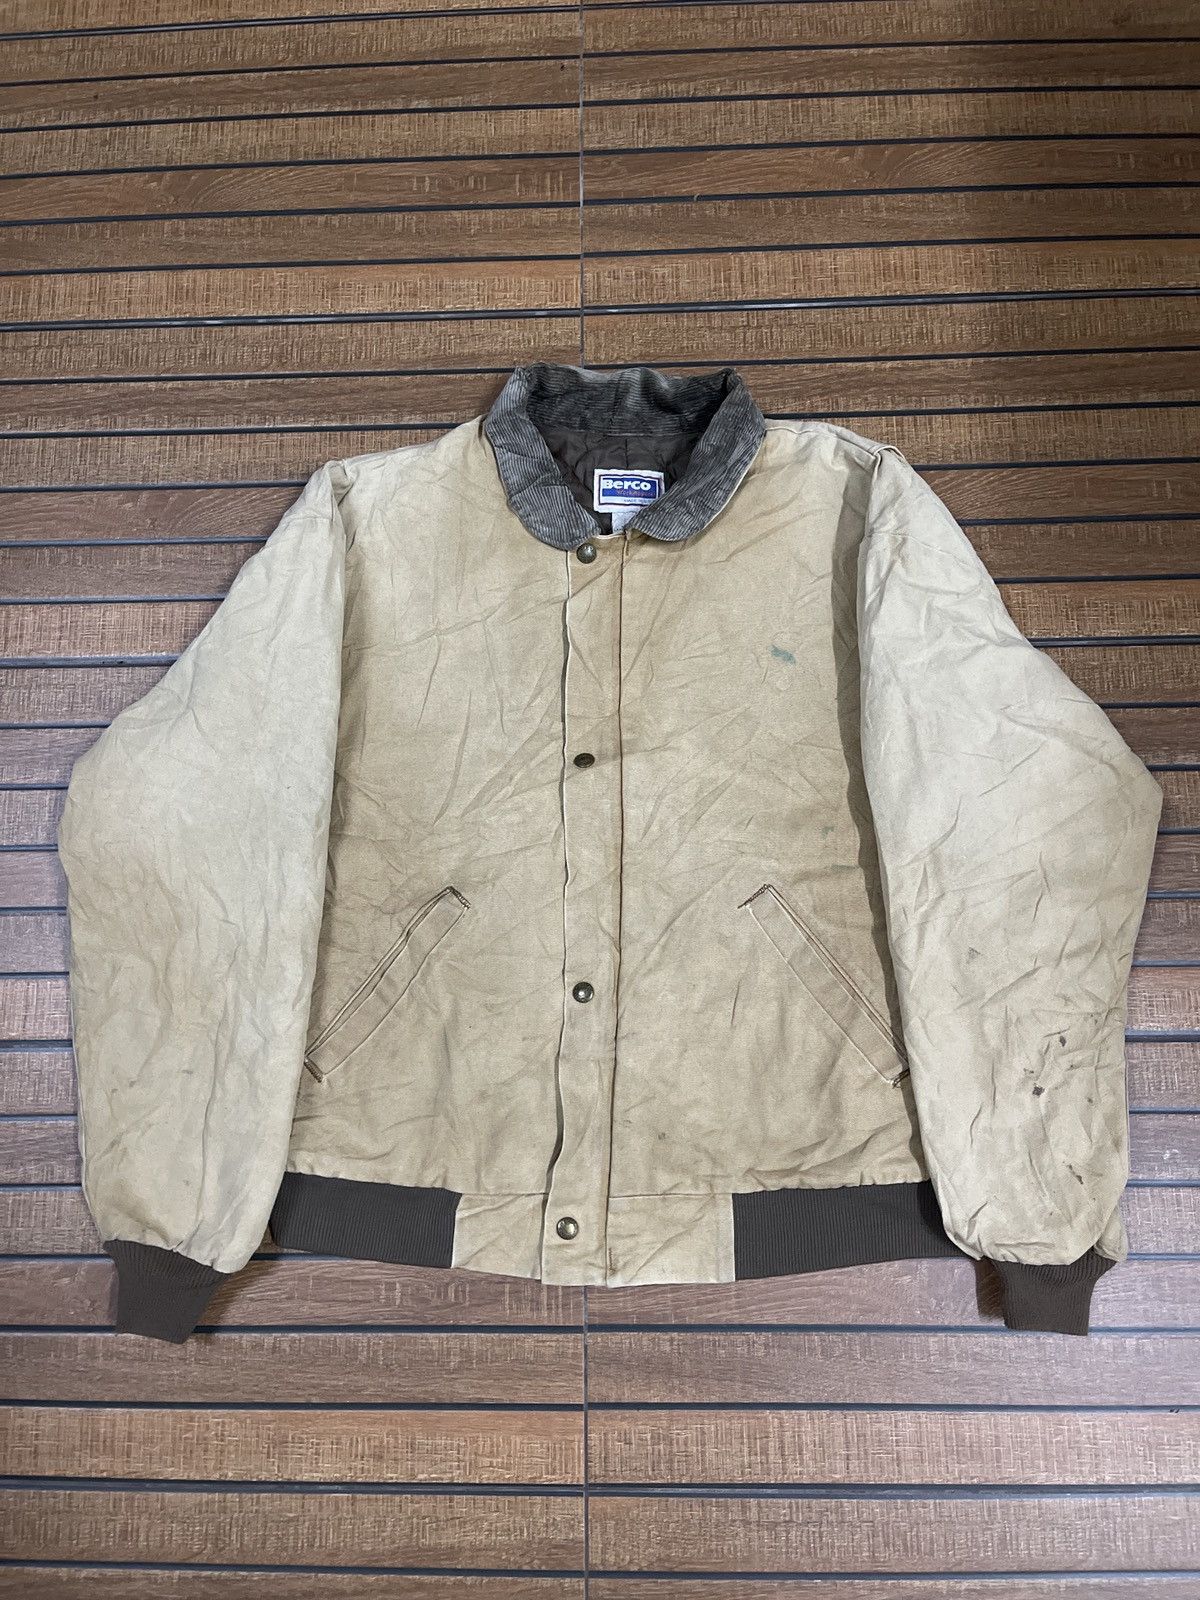 Made In Usa Vintage Berco Work Apparel Jacket | Grailed